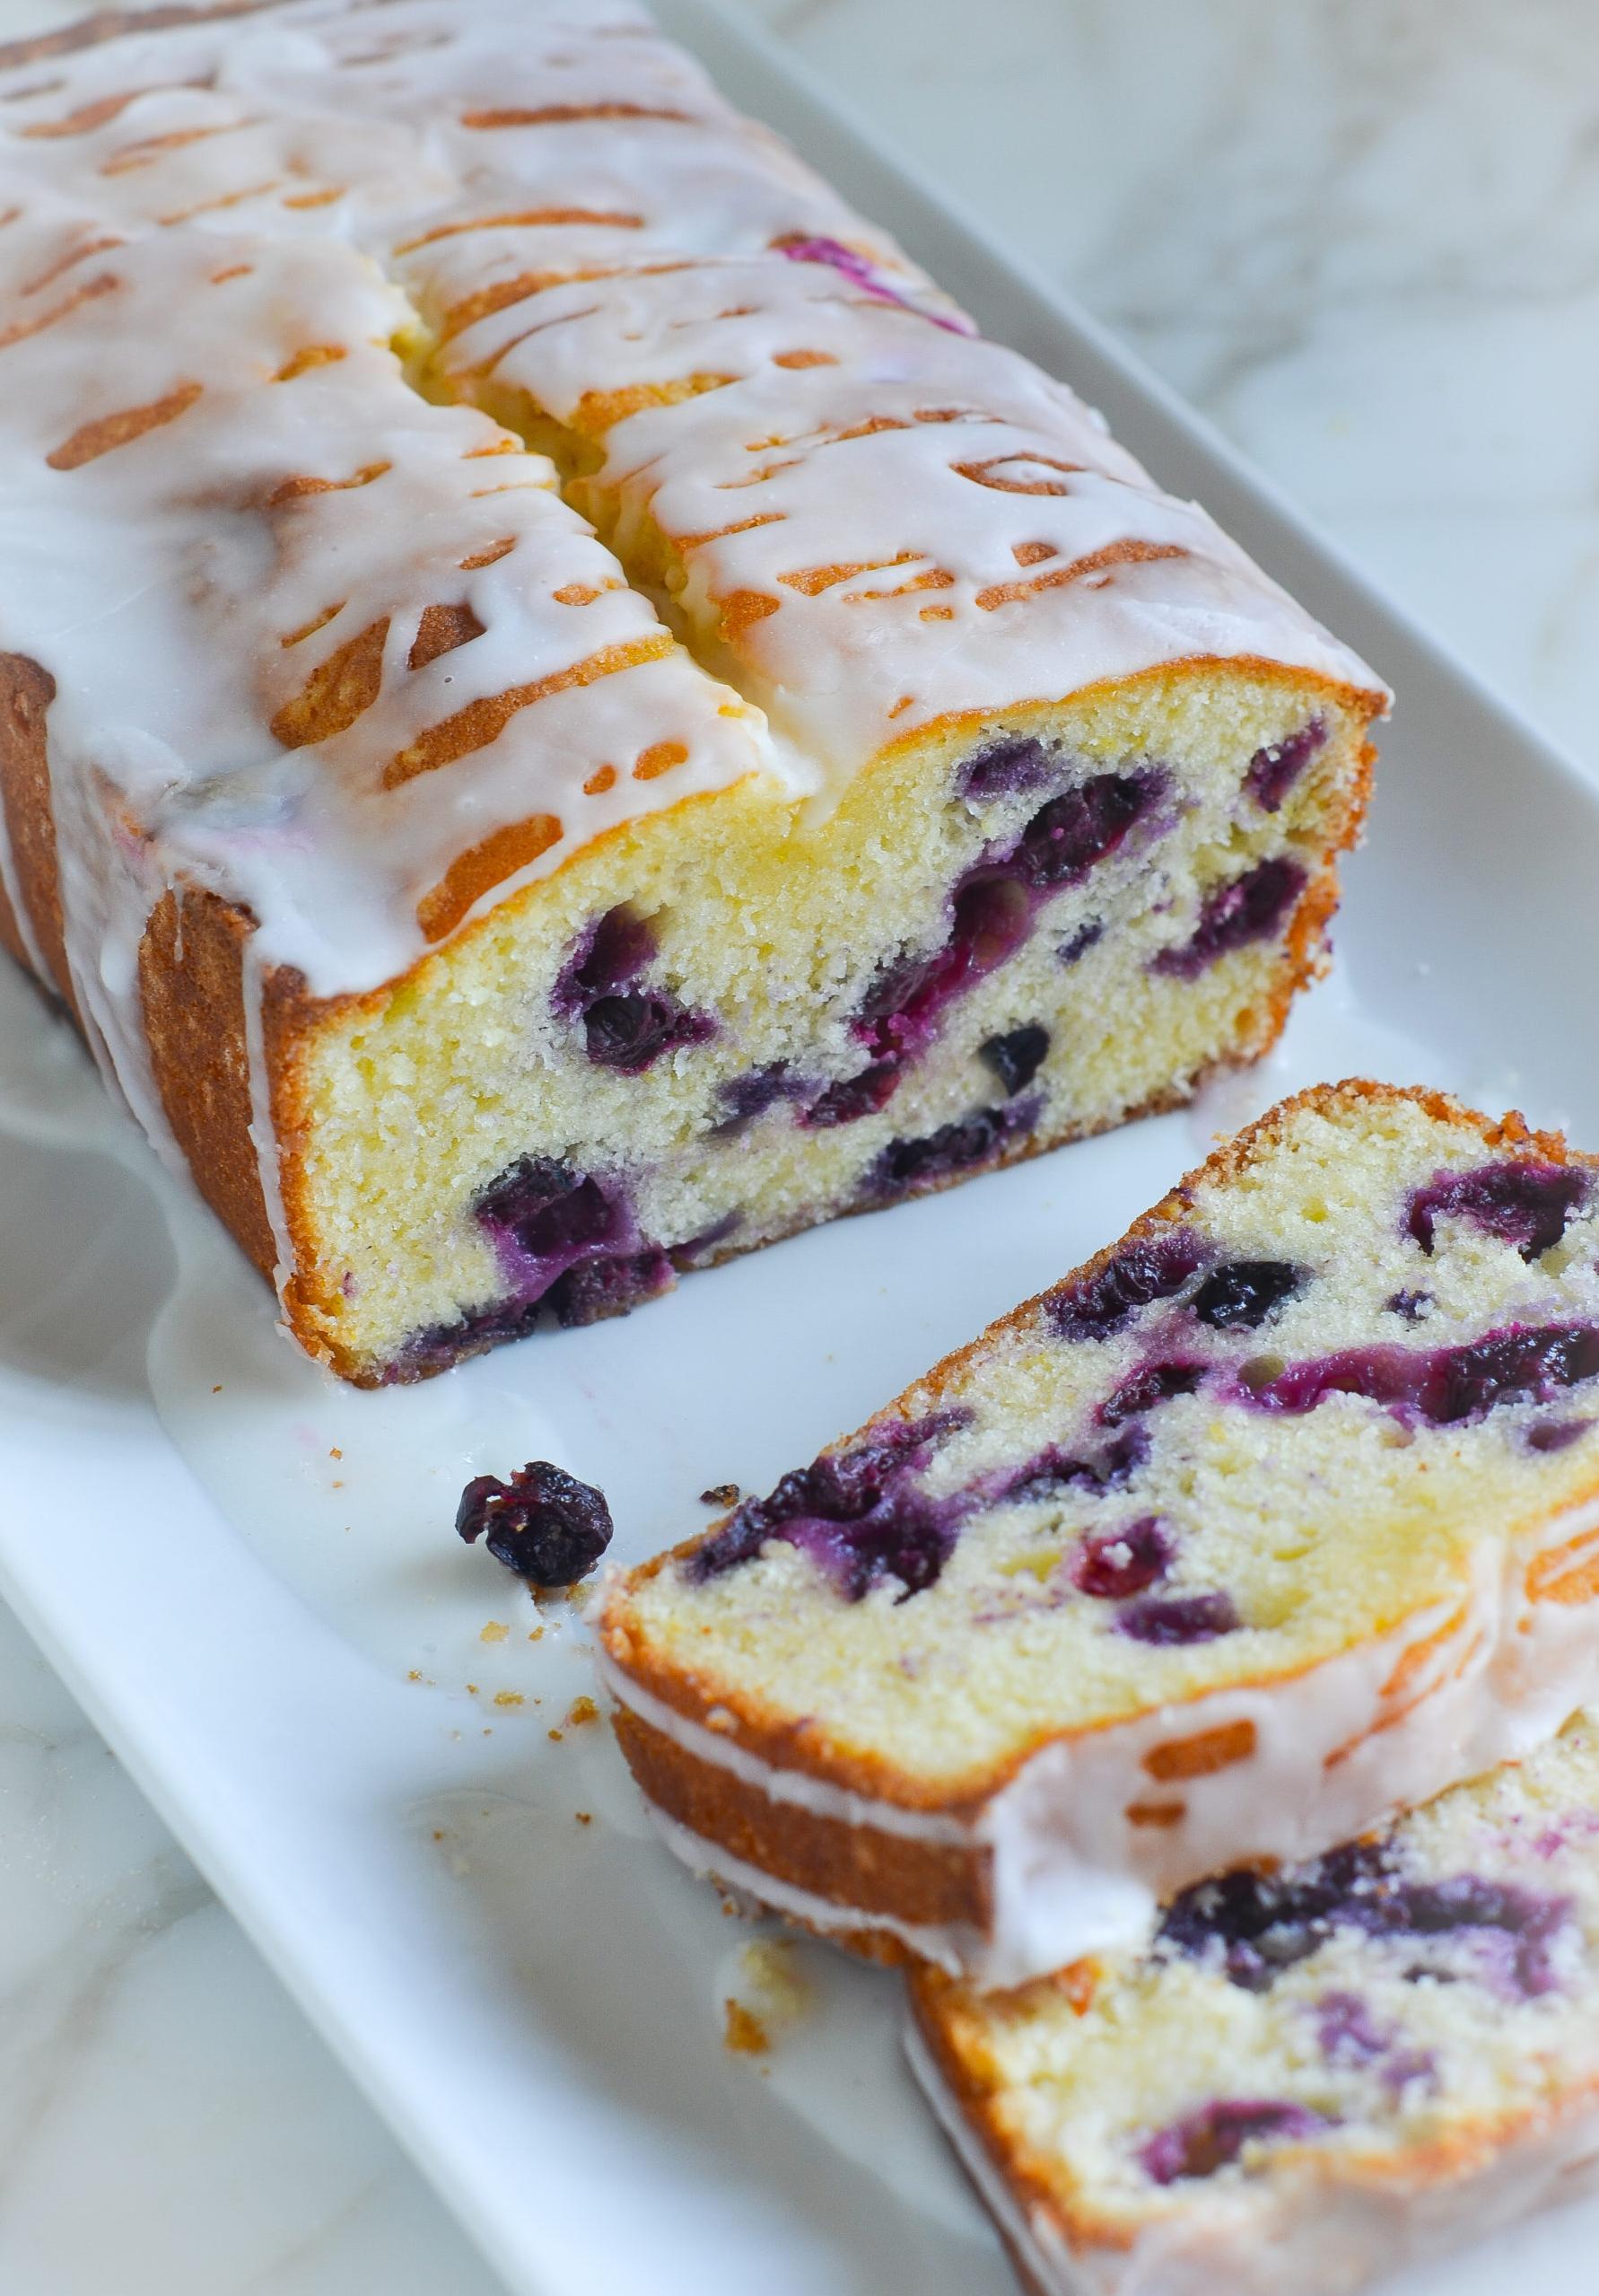 Delicious Blueberry Pound Cake Recipe for Your Sweet Tooth